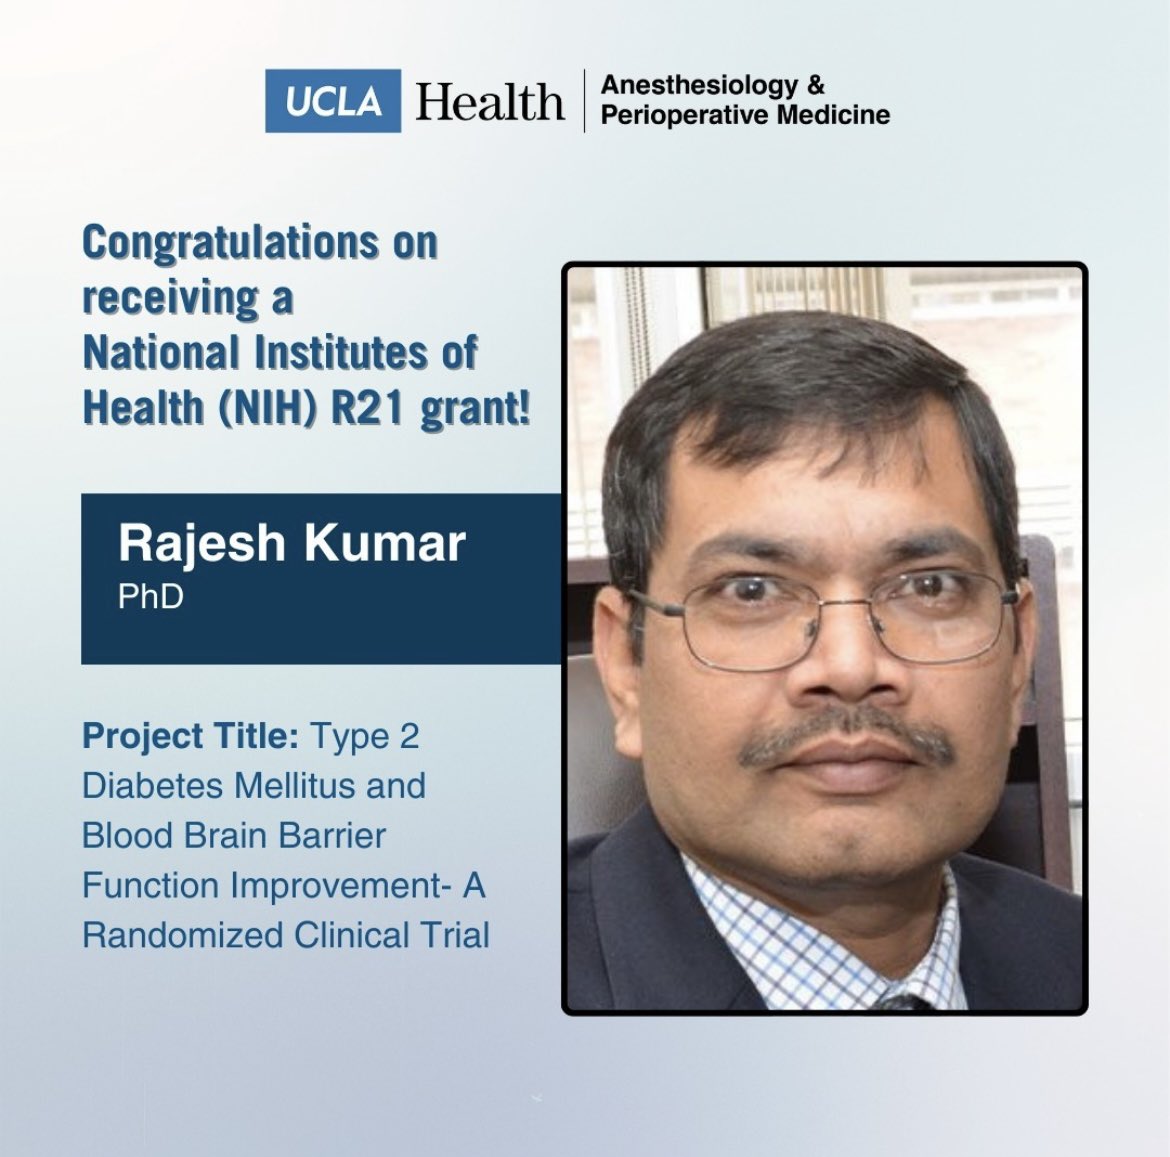 Congratulations to Dr. Rajesh Kumar on receiving a National Institutes of Health (NIH) R21 Grant! 🎉 They will examine whether a low-cost thiamine intervention can improve blood brain barrier function and reduce mood and cognition deficits in Type 2 diabetes mellitus adults.